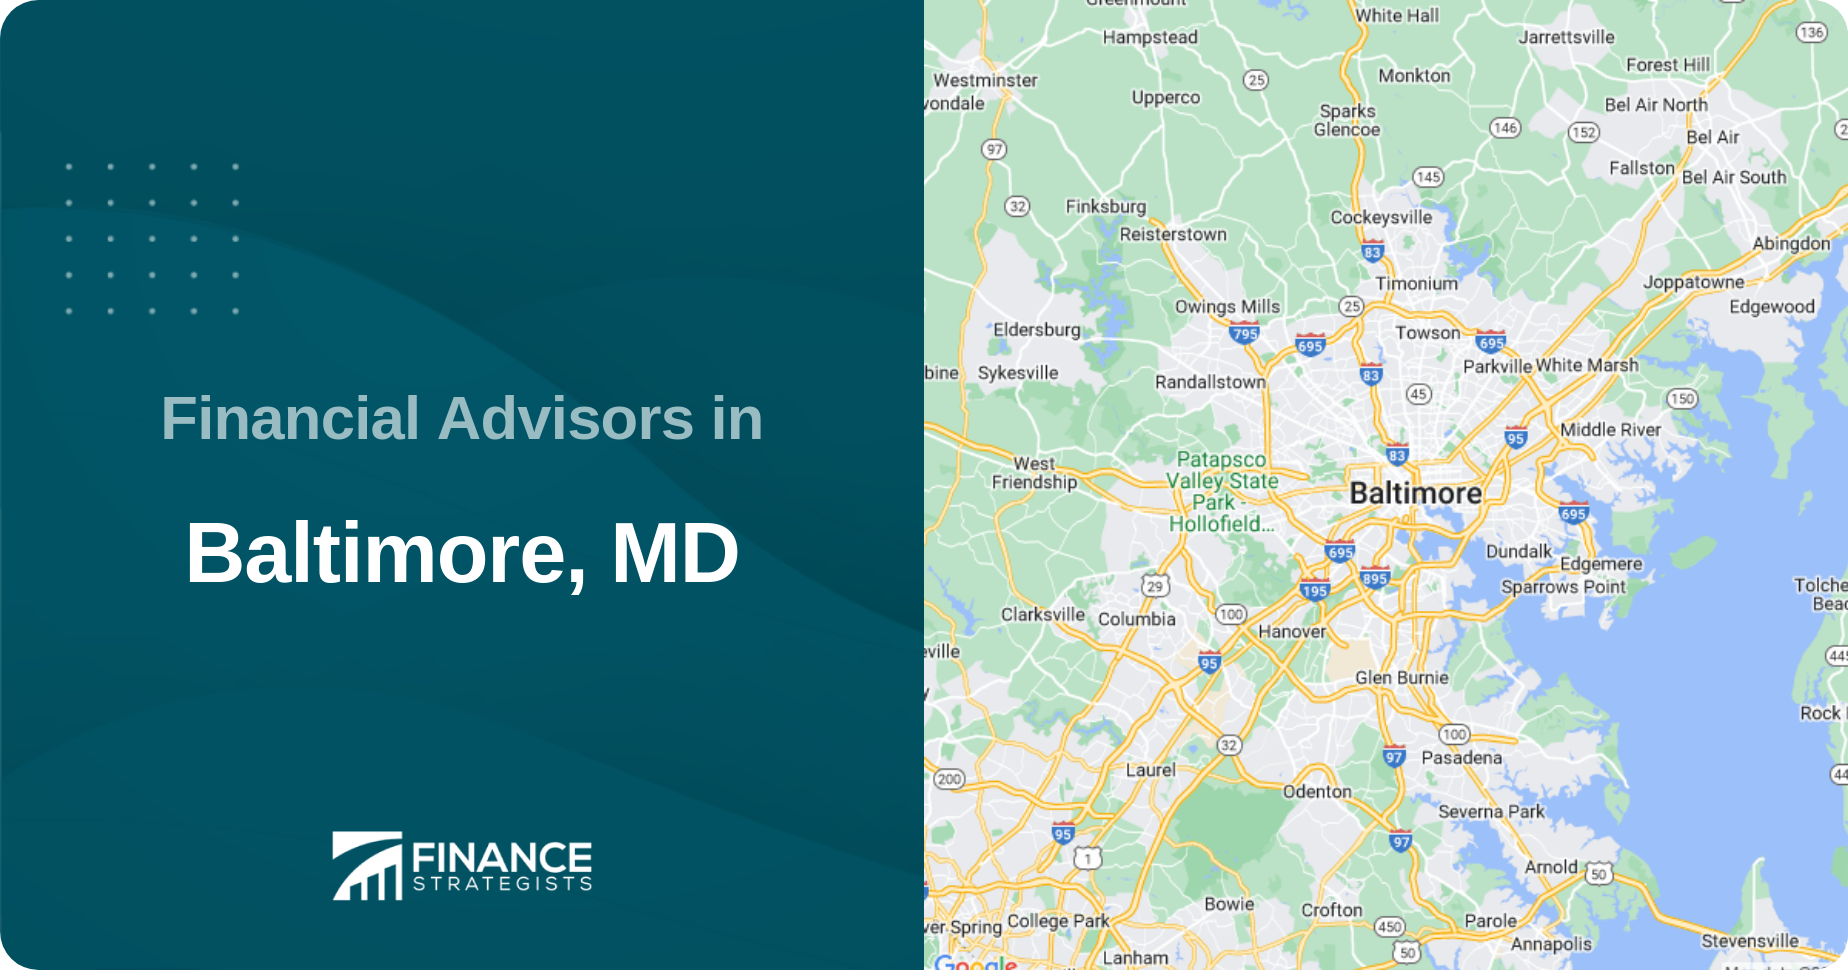 Financial Advisors in Baltimore, MD